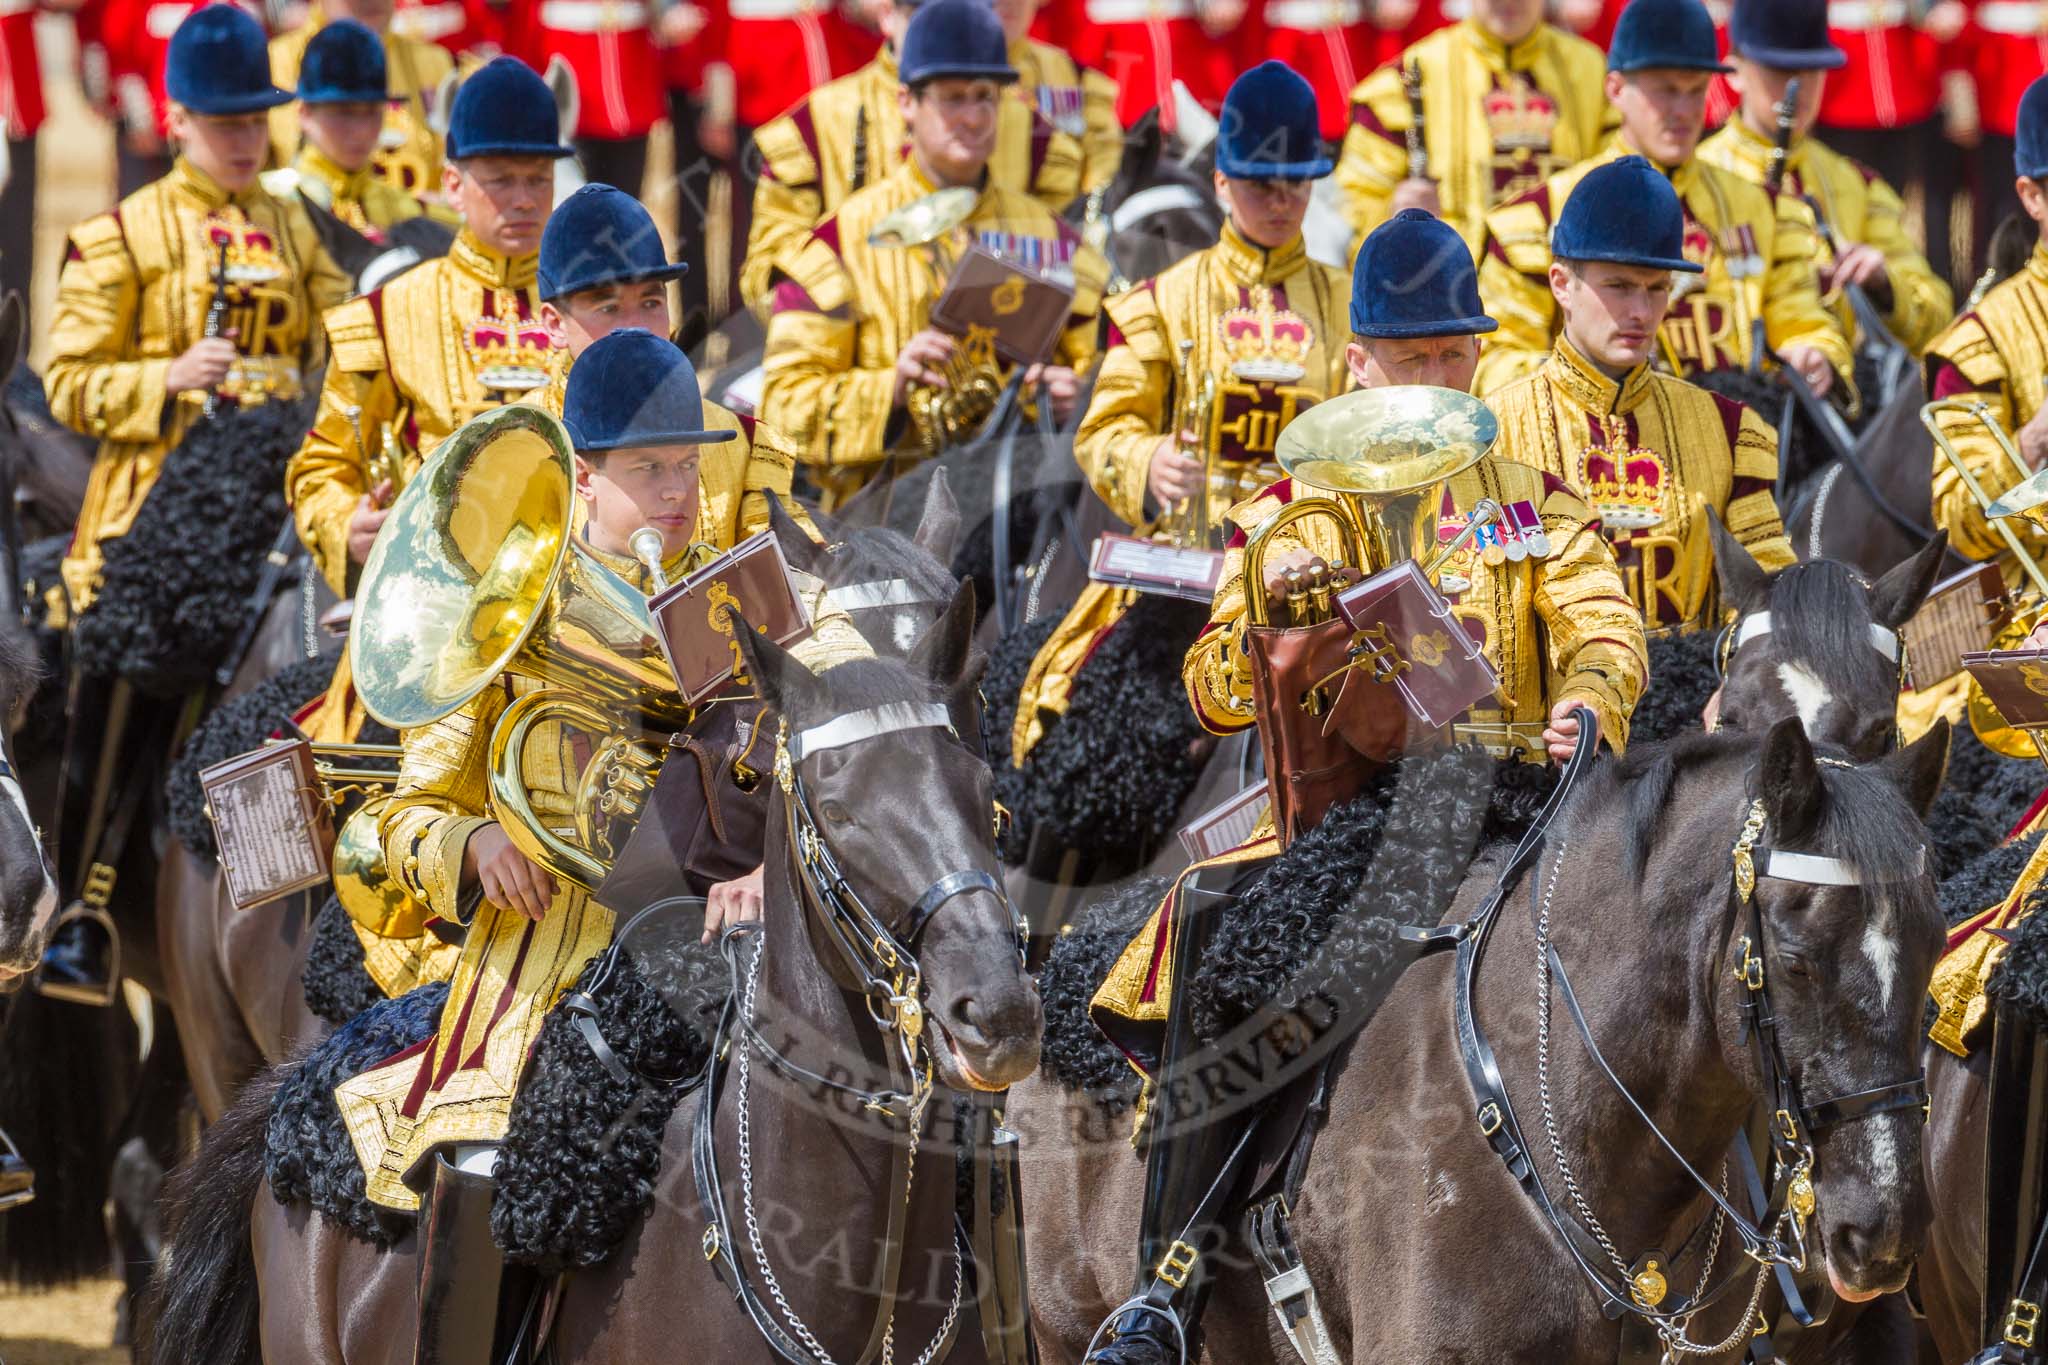 The Colonel's Review 2015.
Horse Guards Parade, Westminster,
London,

United Kingdom,
on 06 June 2015 at 11:58, image #542